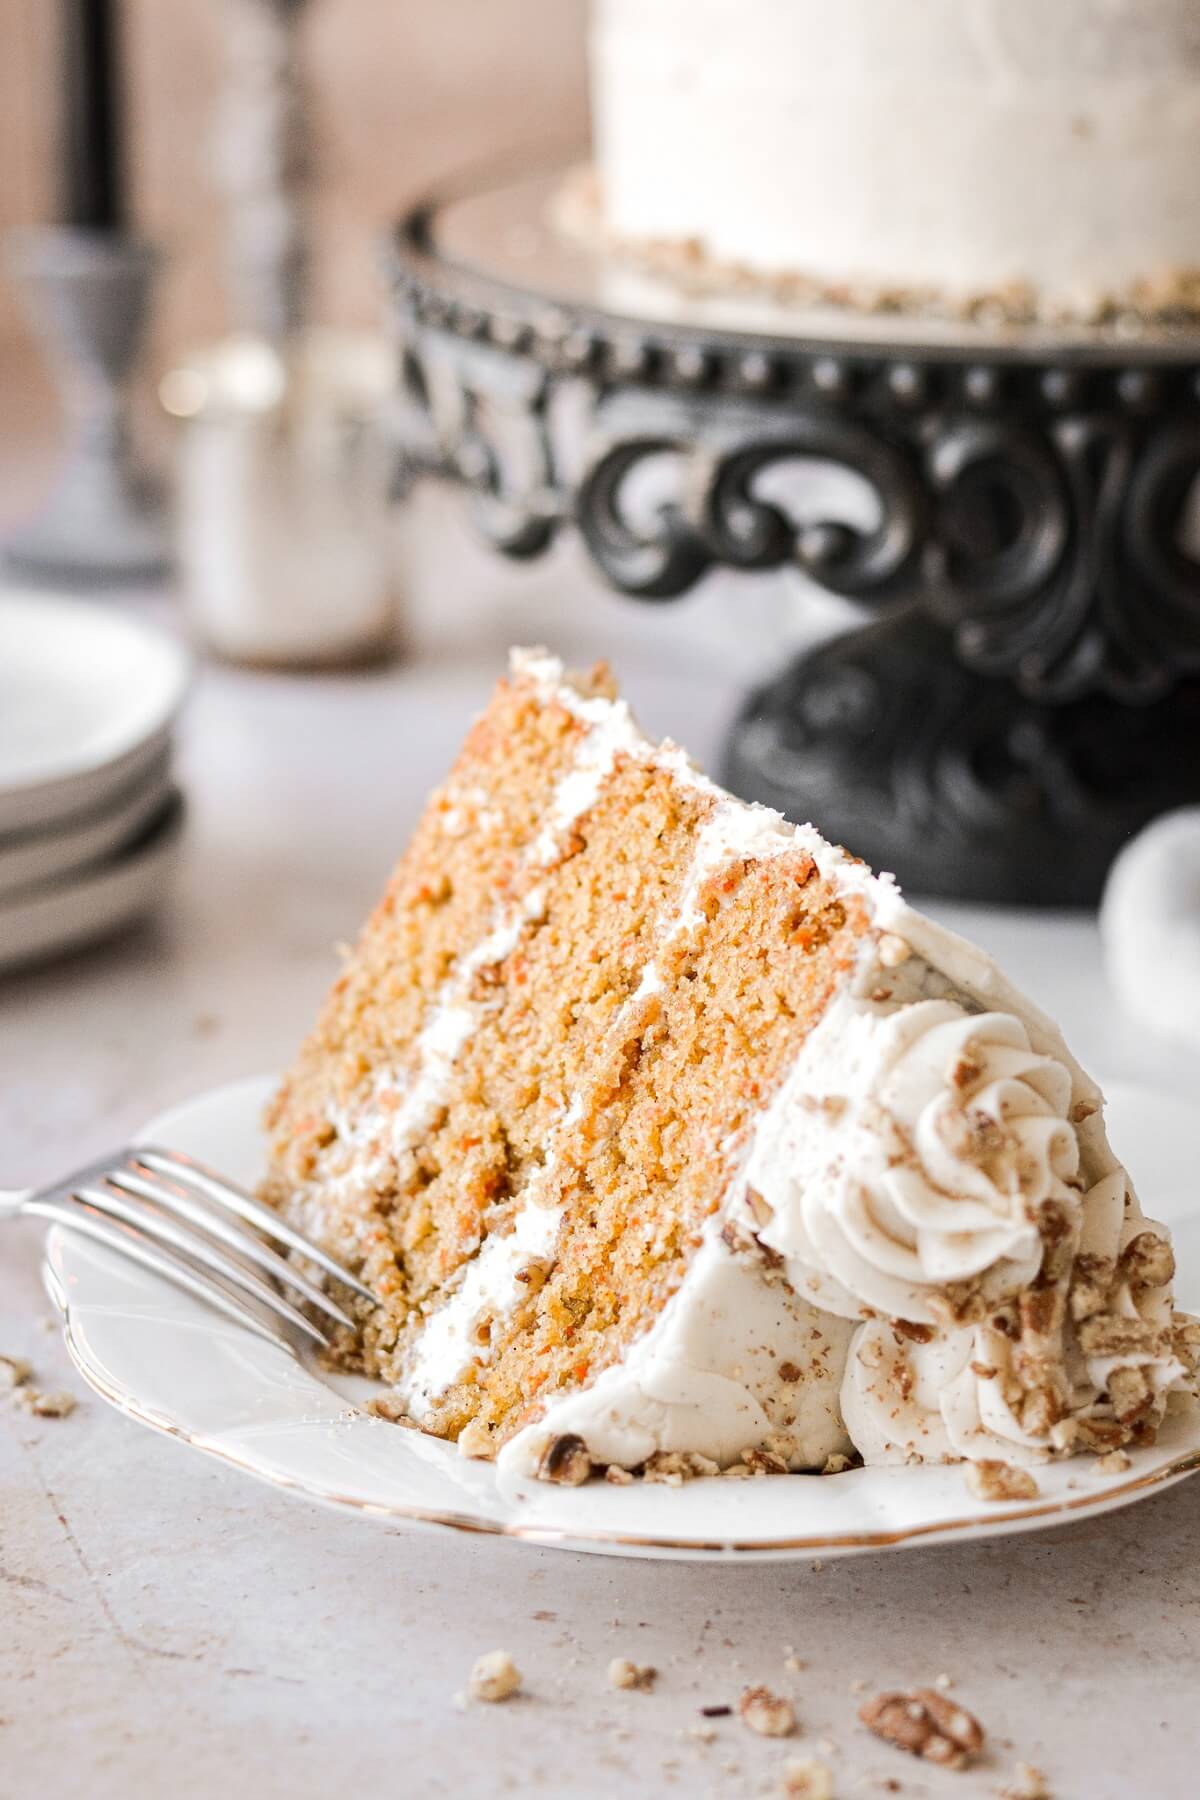 A slice of carrot cake with chopped pecans.